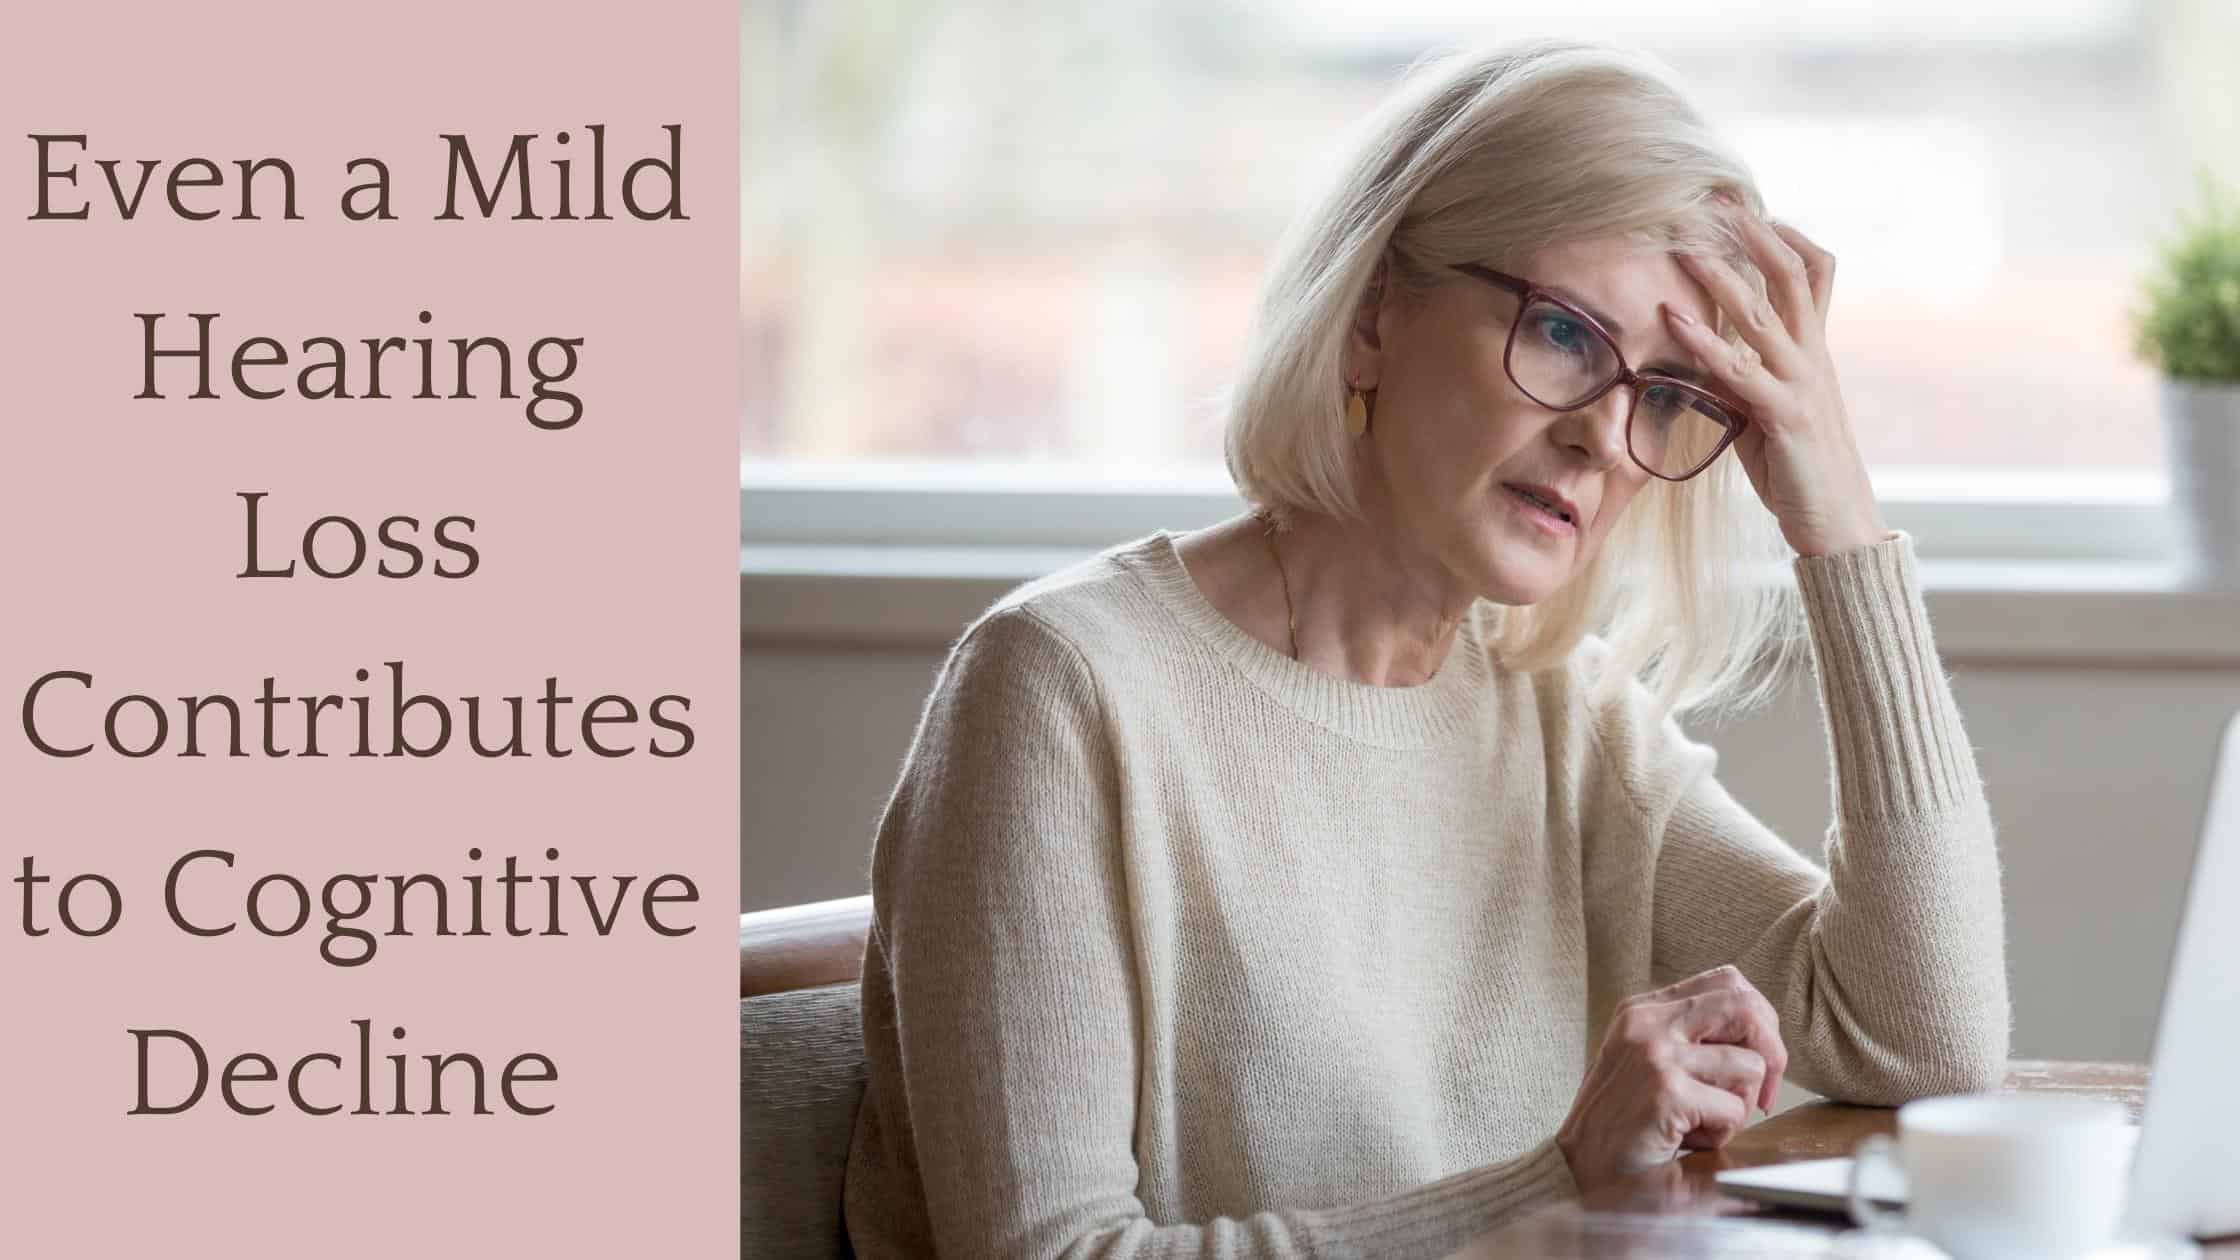 Even a Mild Hearing Loss Contributes to Cognitive Decline